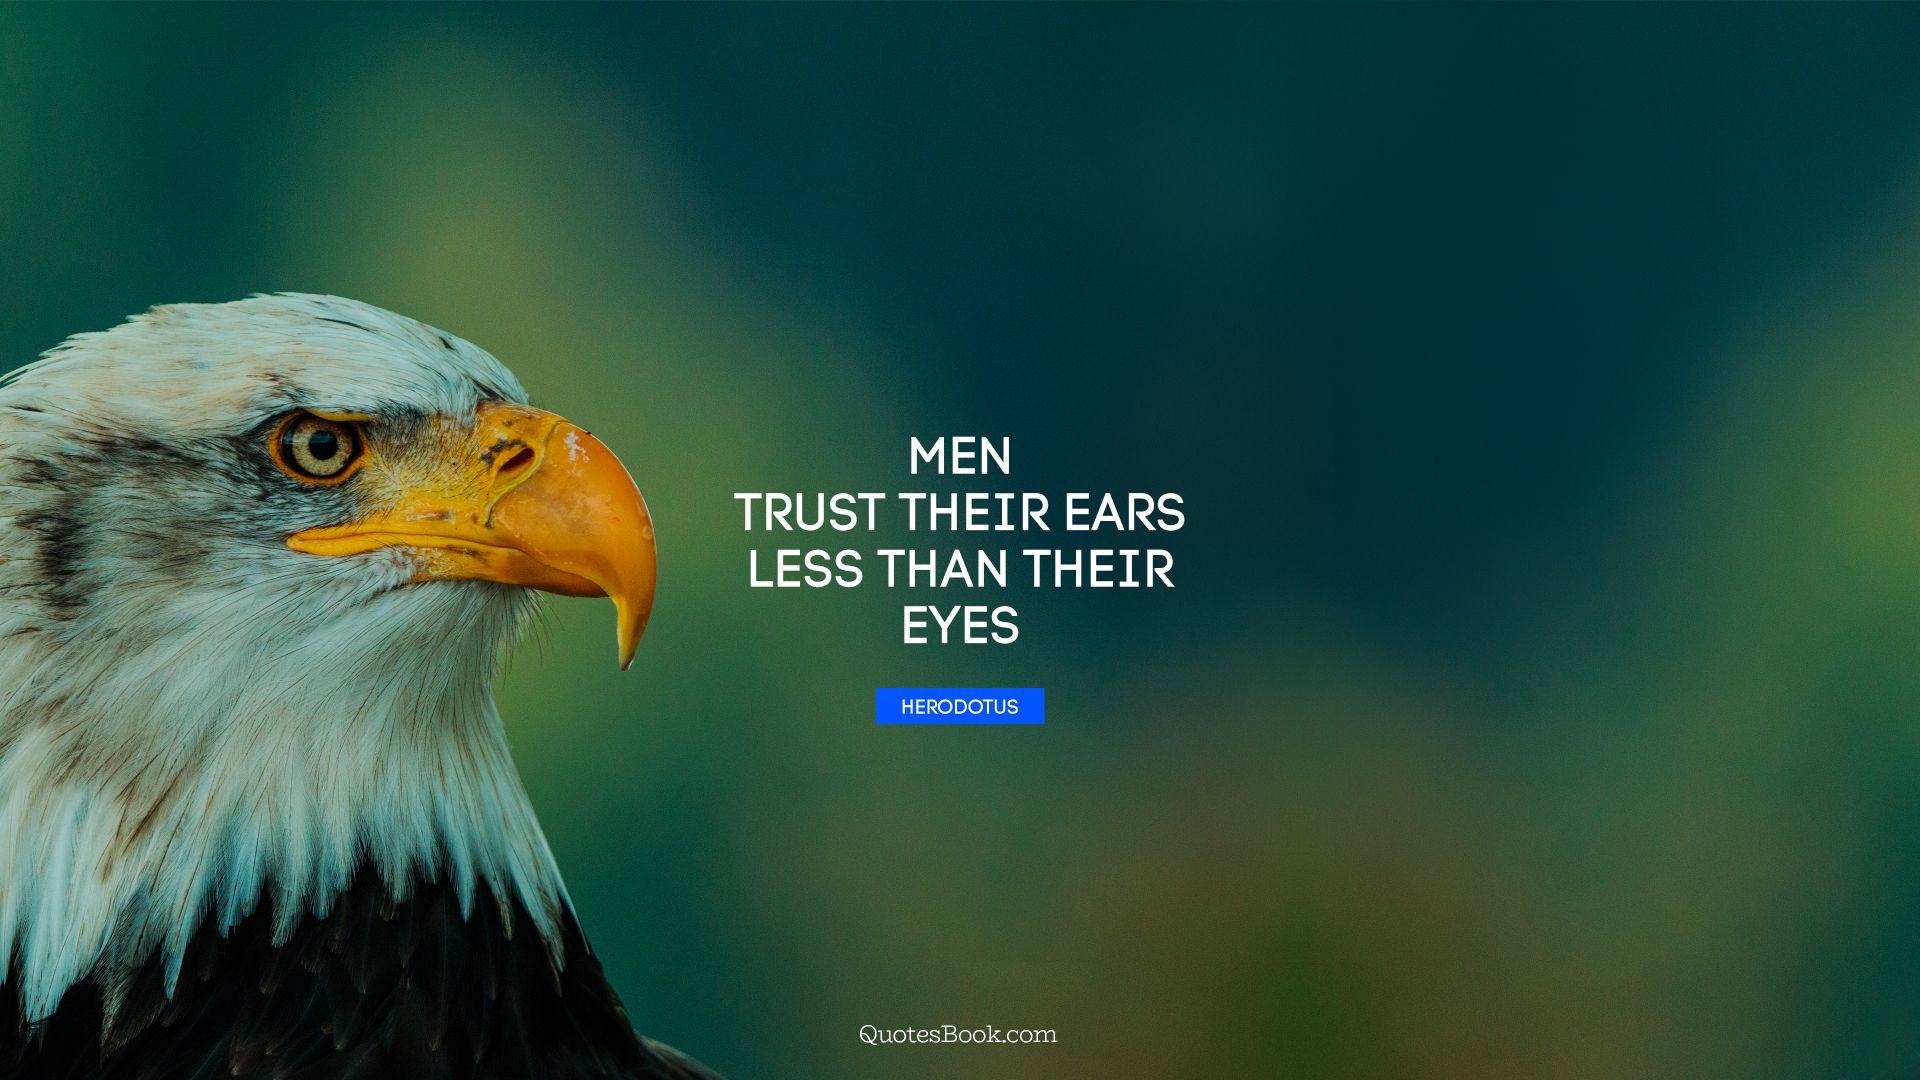 Men trust their ears less than their eyes. - Quote by Herodotus